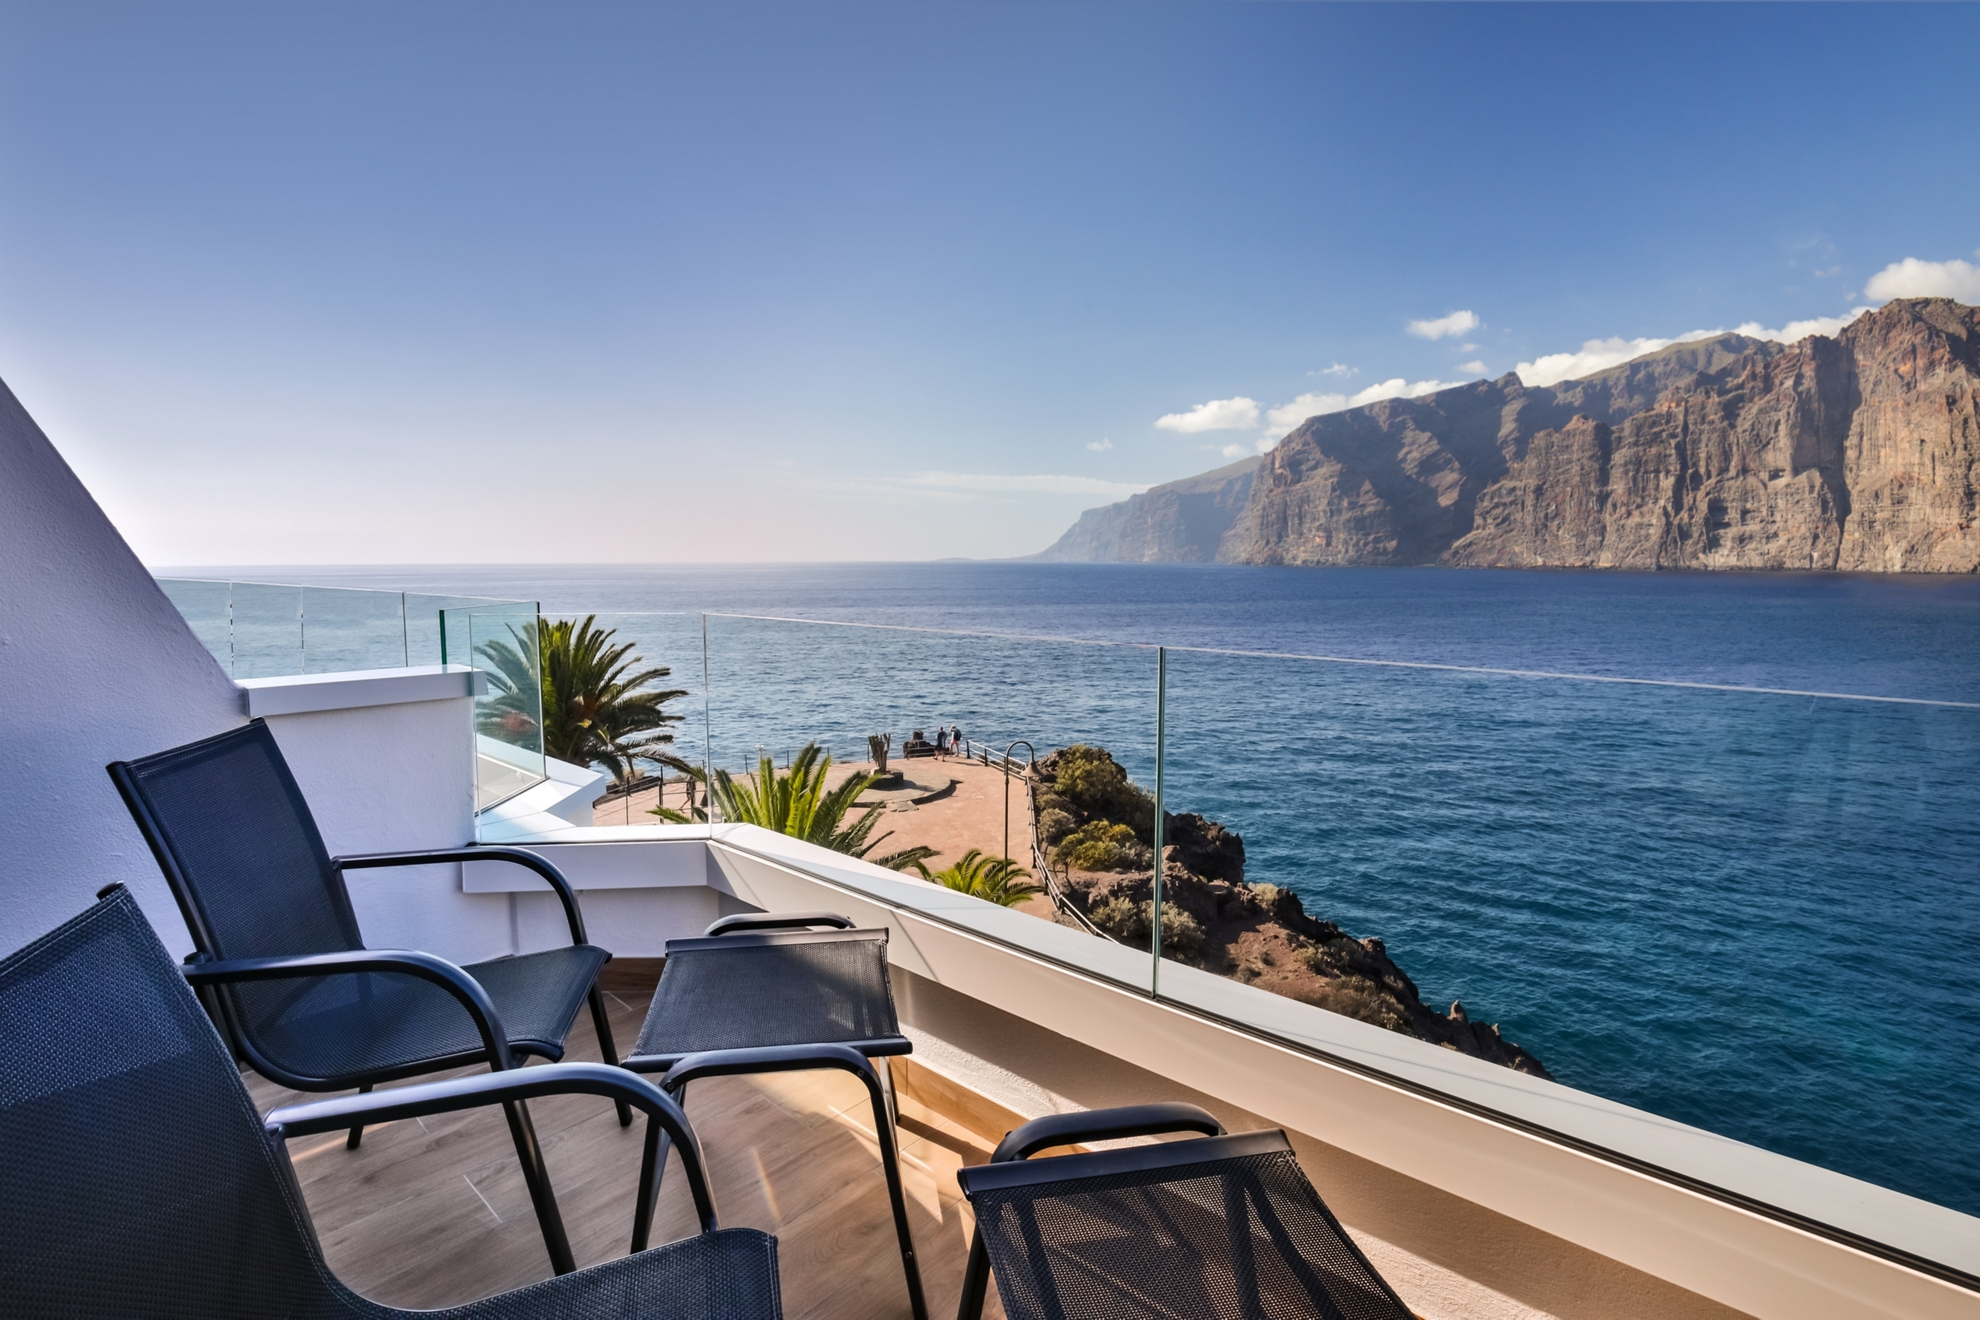 Couples-only-holidays-spain: View of Los Gigantes, Tenerife from the Barceló Santiago balconies